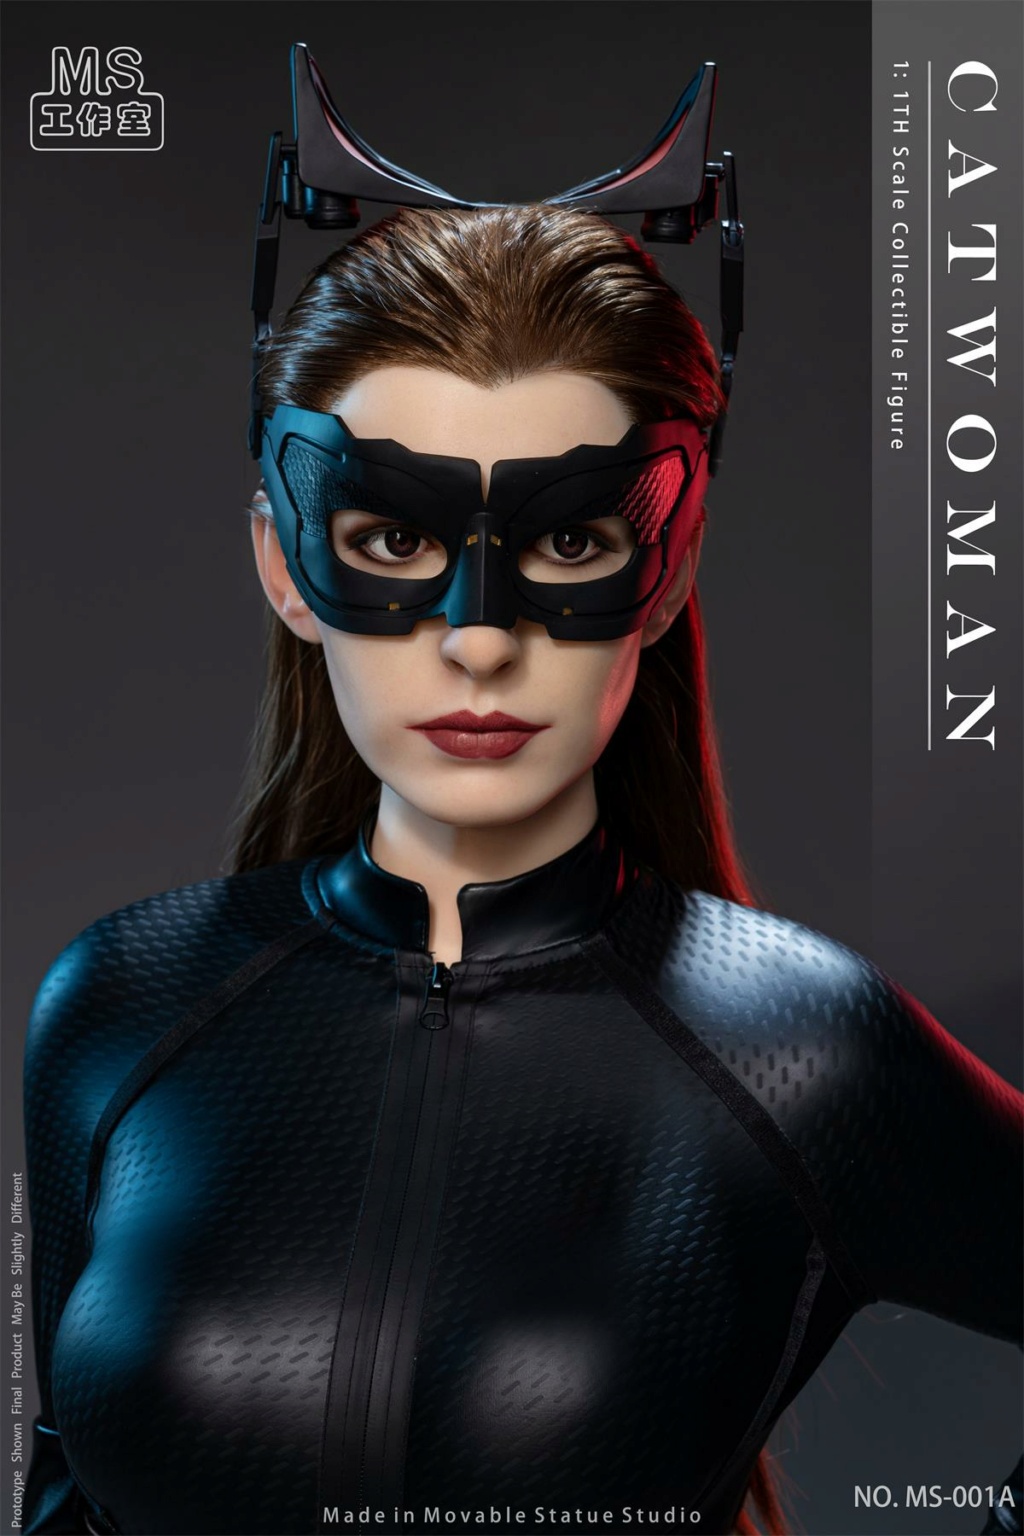 movie-based - NEW PRODUCT: MS Studio: Catwoman Movie Version 1/1 Proportion Catwoman Cherished Movable Figure “ Grand ” Age MS-001A 2182